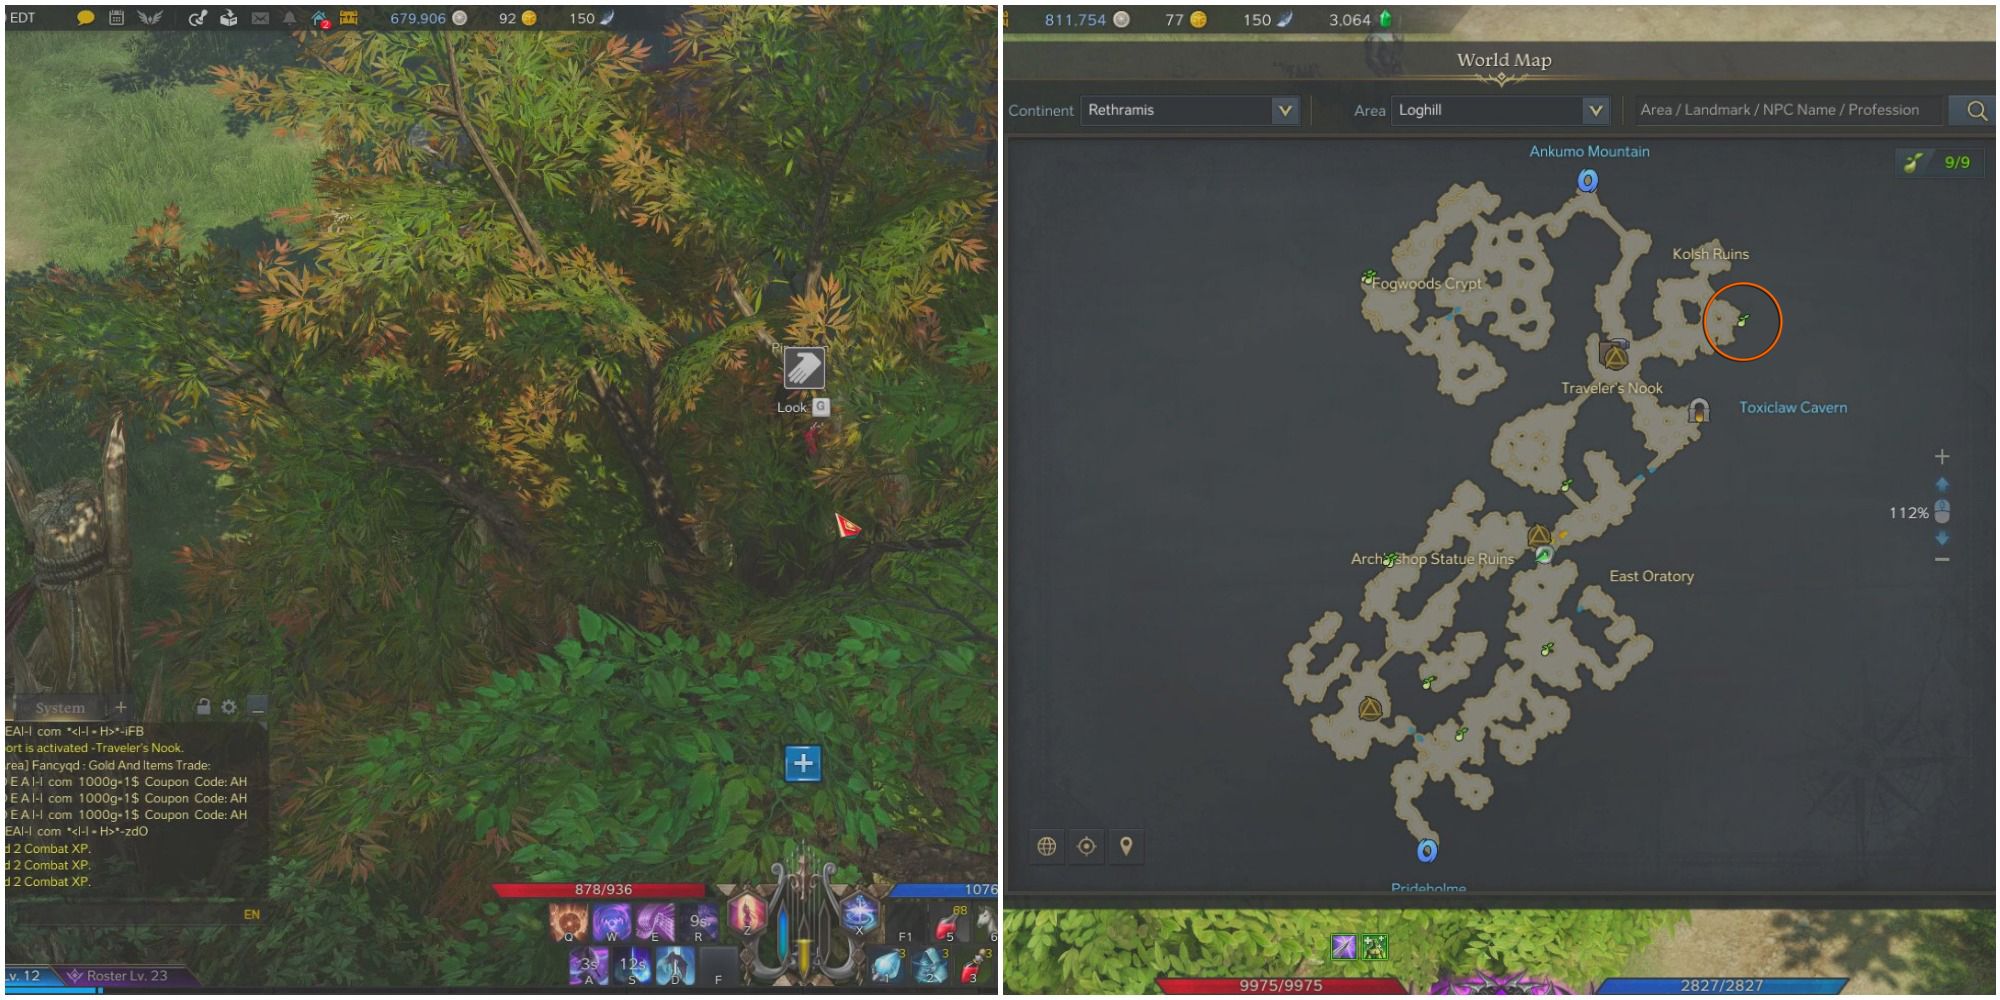 A split image of a bard hidden behind trees with a Look icon and a map of Loghill